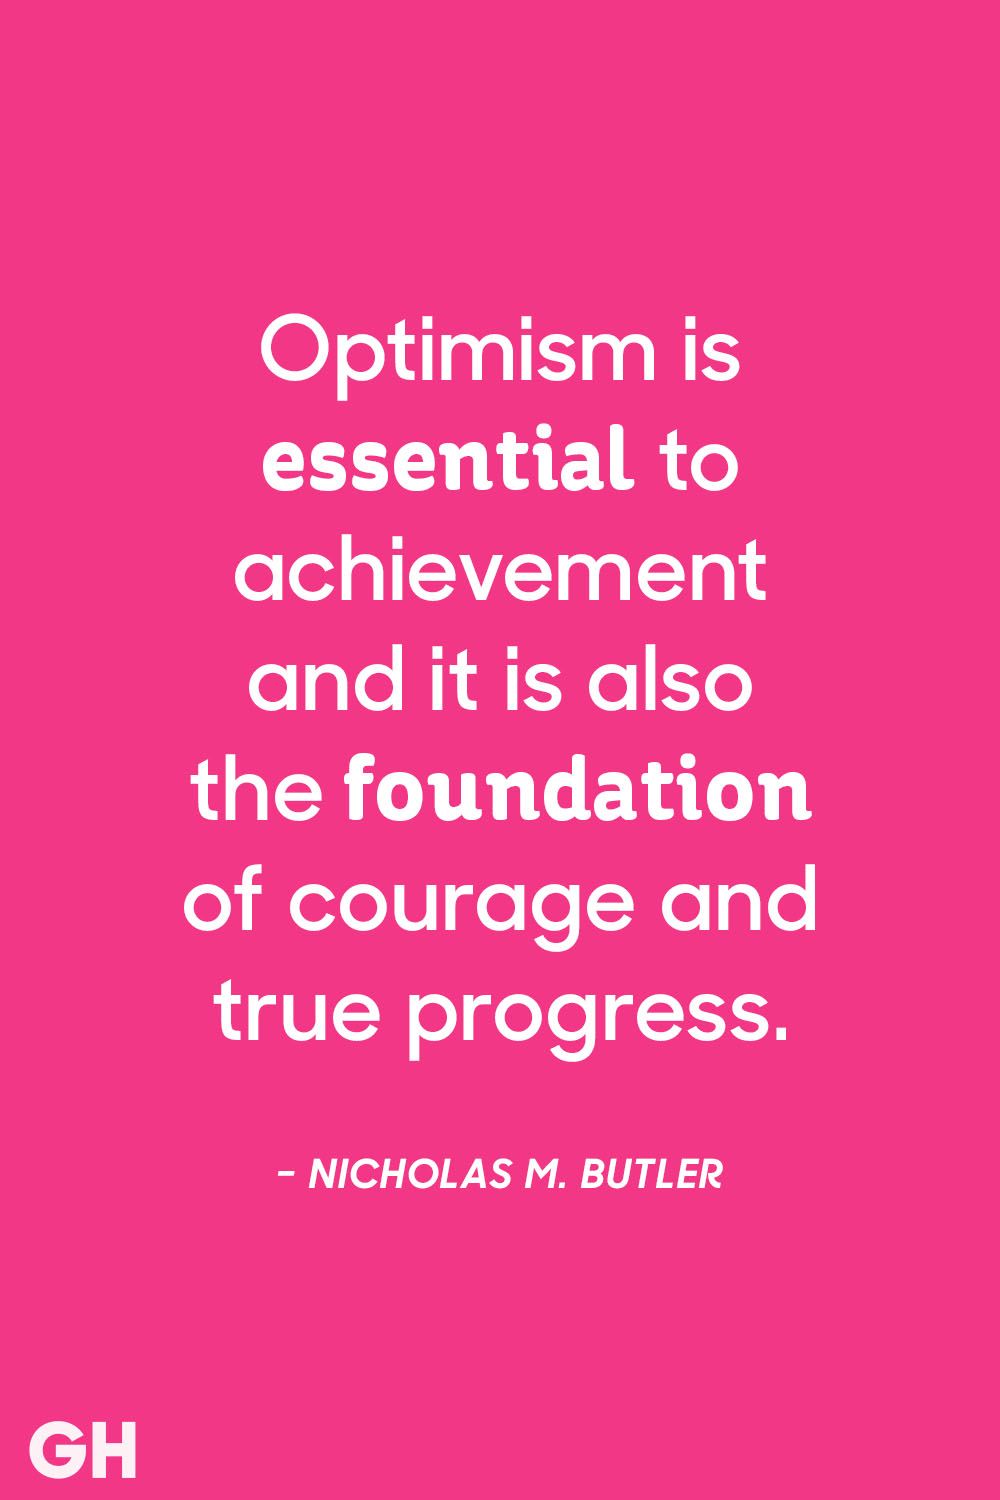 120 Best Inspirational Optimism Quotes And Sayings